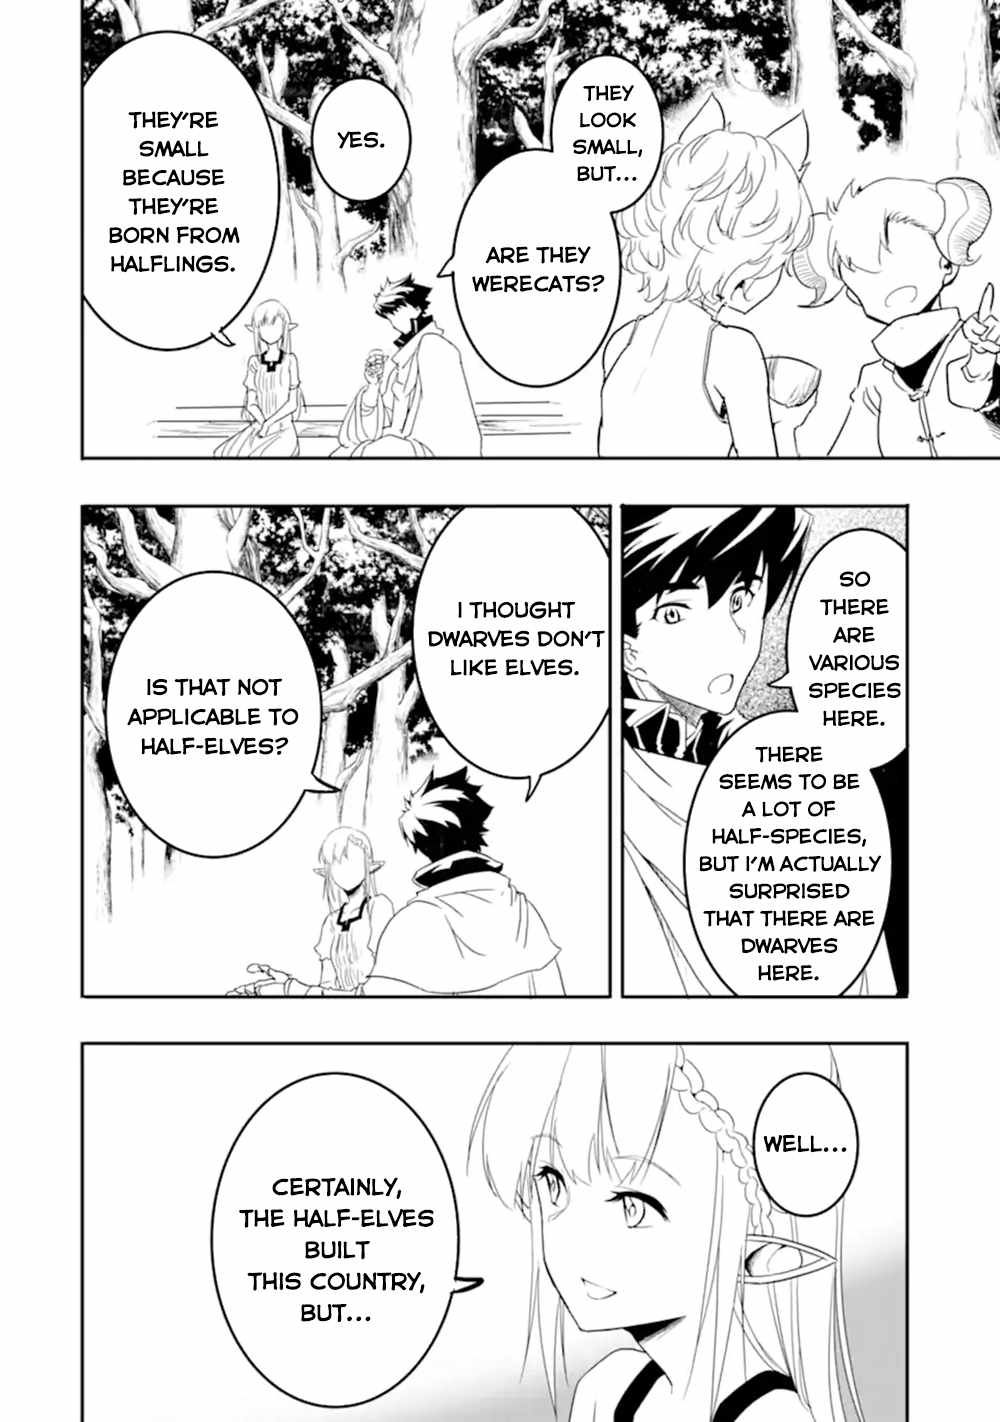 Another World Nation Archimaira: The Weakest King and his Unparalleled Army Chapter 6-2-eng-li - Page 2